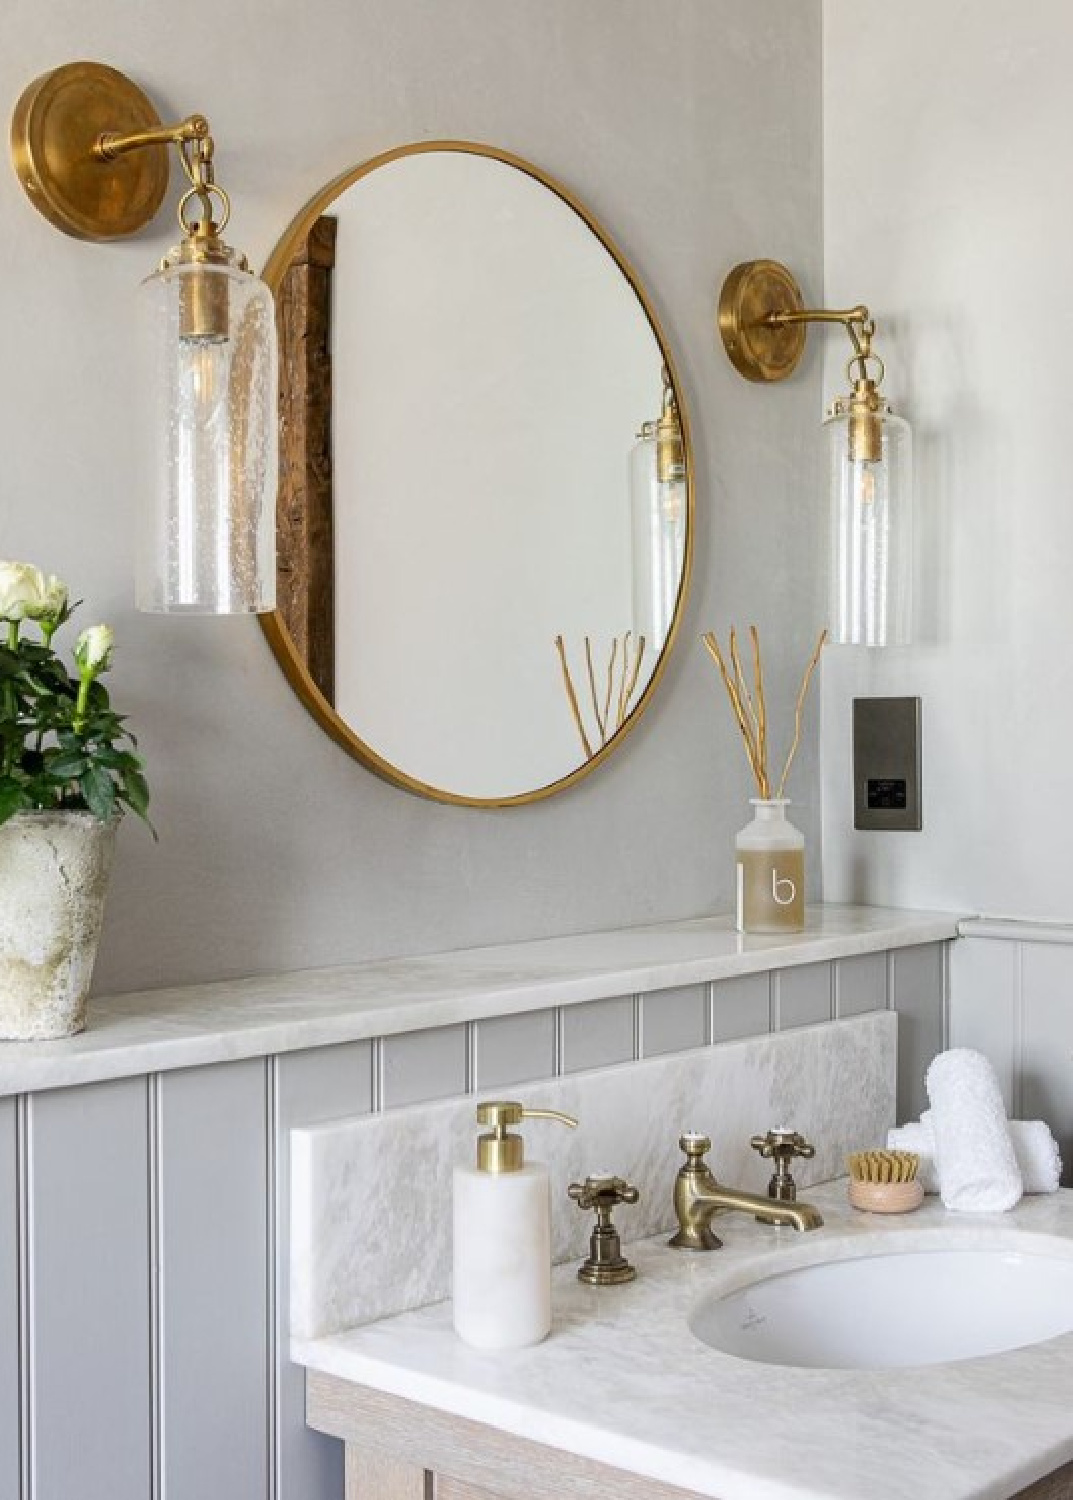 English country style luxurious bathroom in a lovely Cotswold cottage in Kingham (@littlenestcottage) with design by Rachel Winham Interior Design. #englishcottage #cottagebathrooms